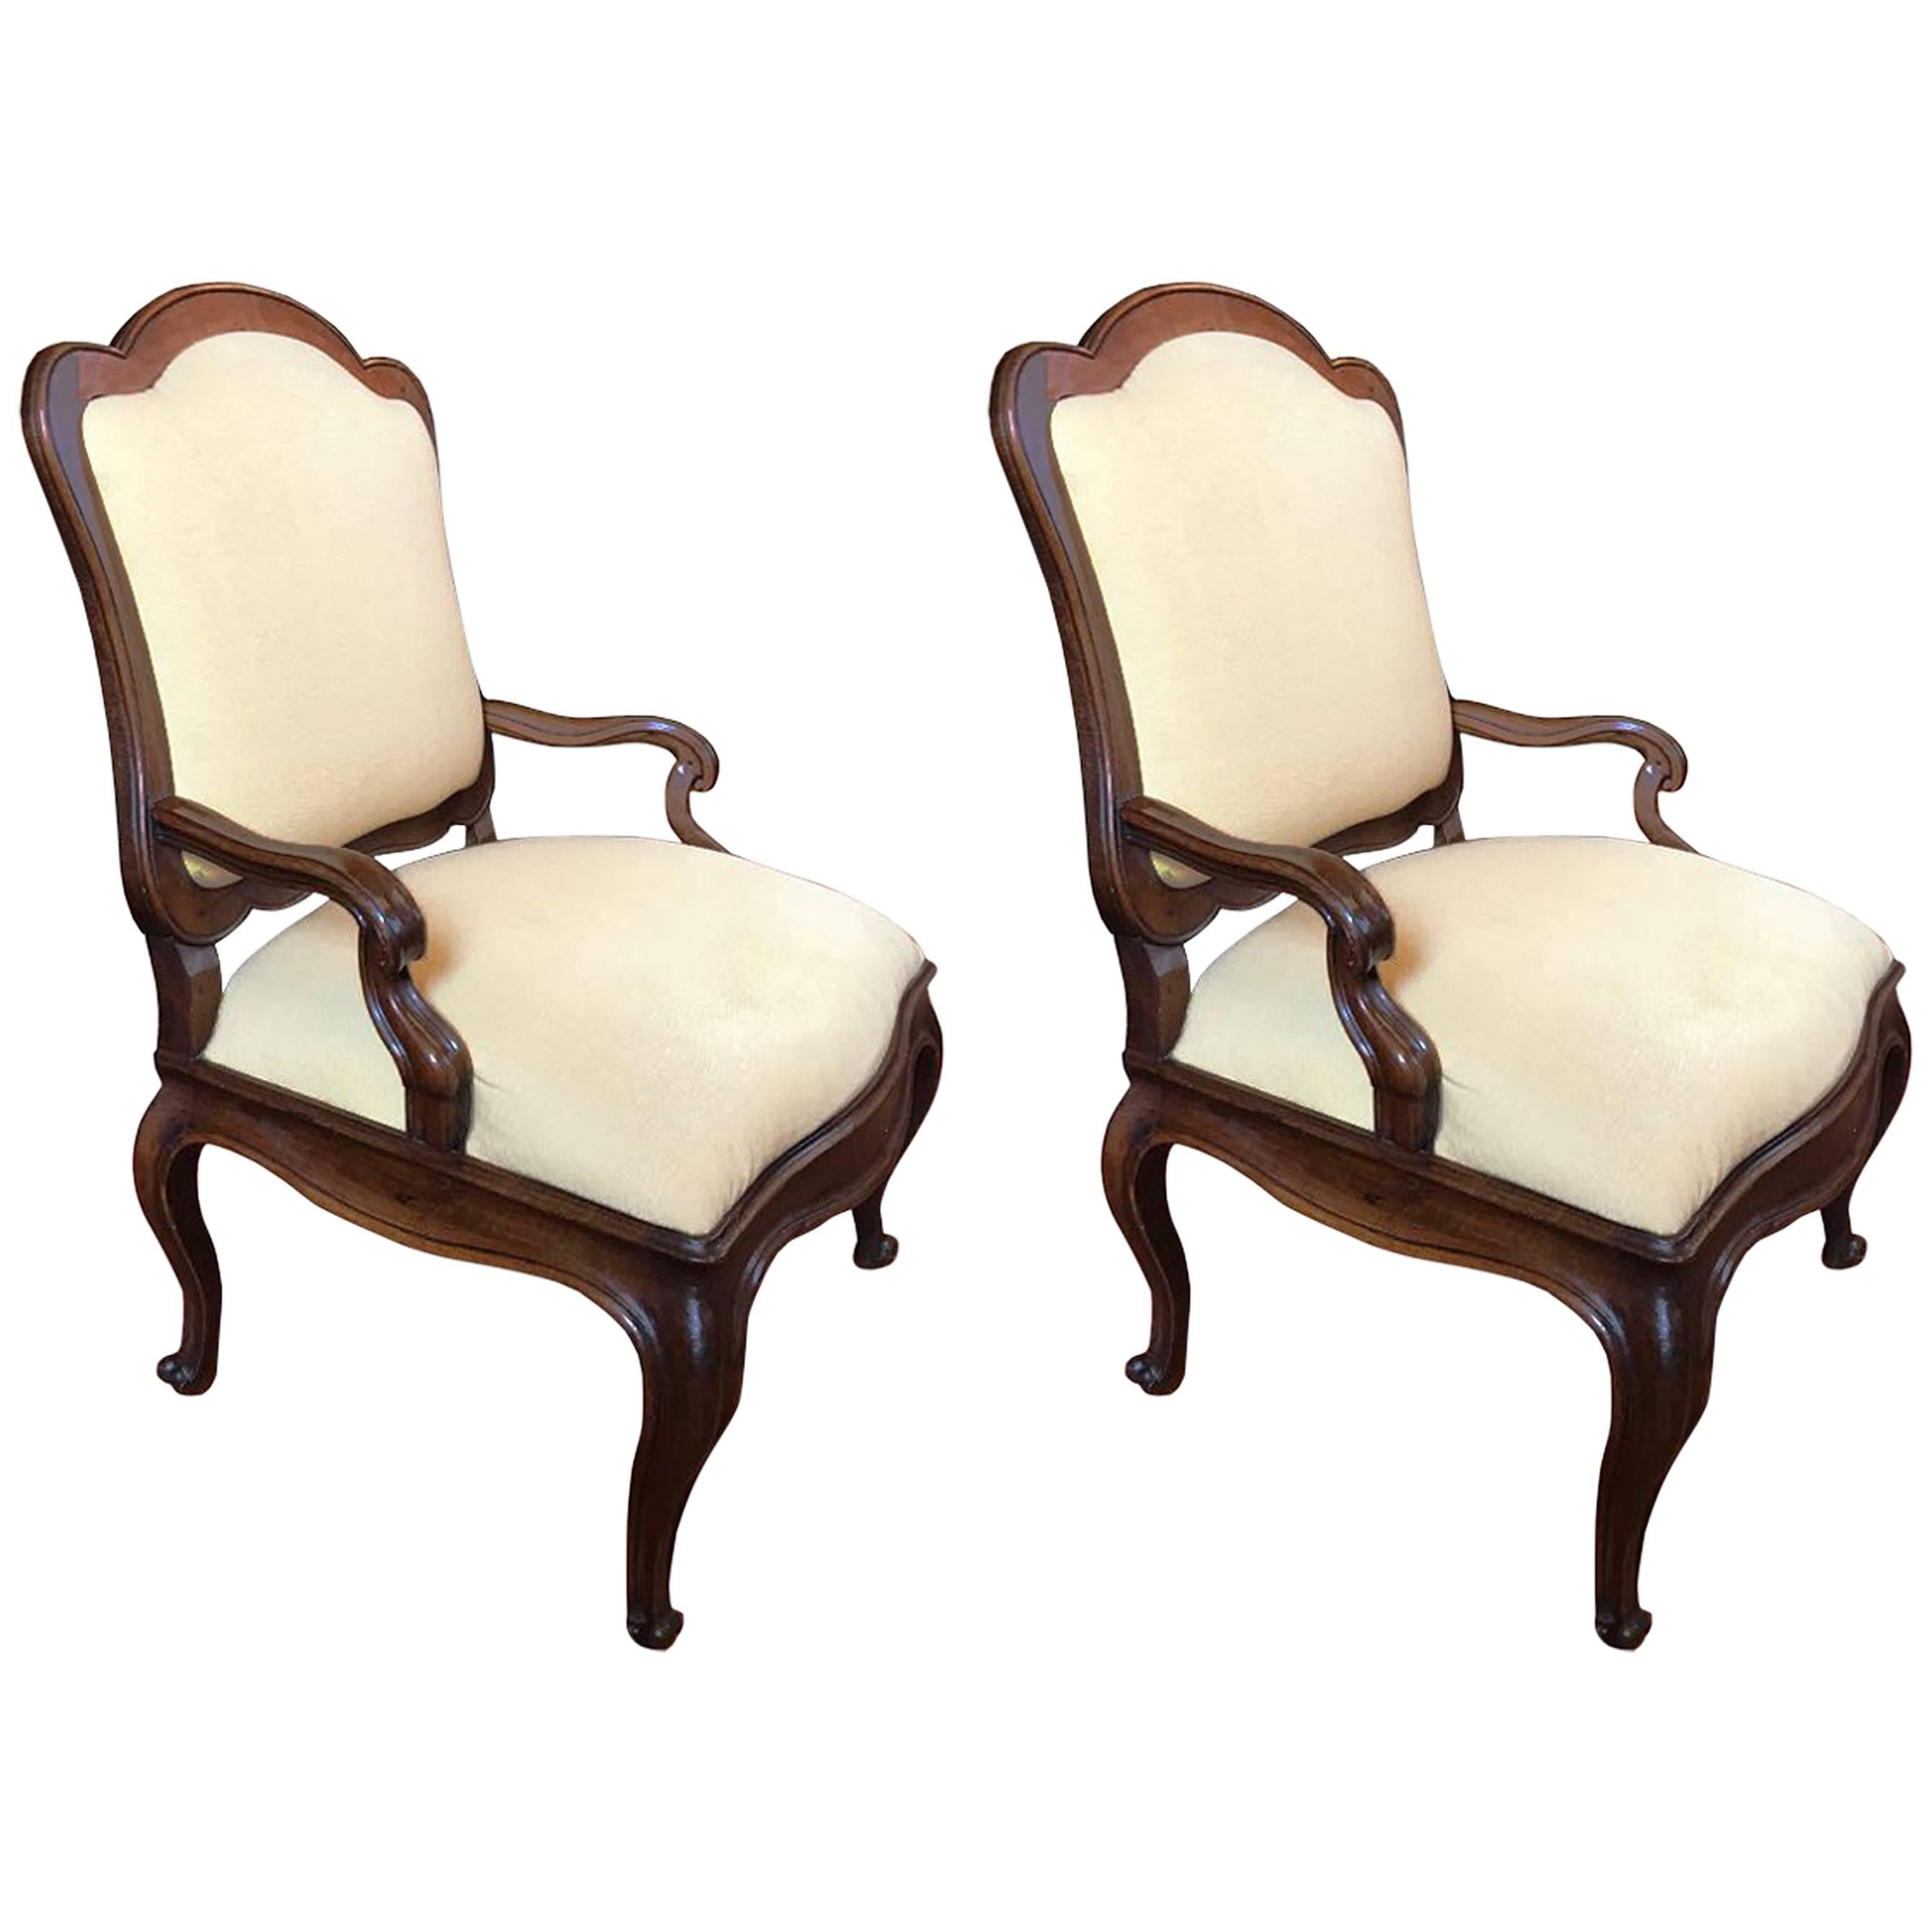 Mid-18th Century Italian Antique Hand-Carved Walnut Upholstered Armchairs, Pair